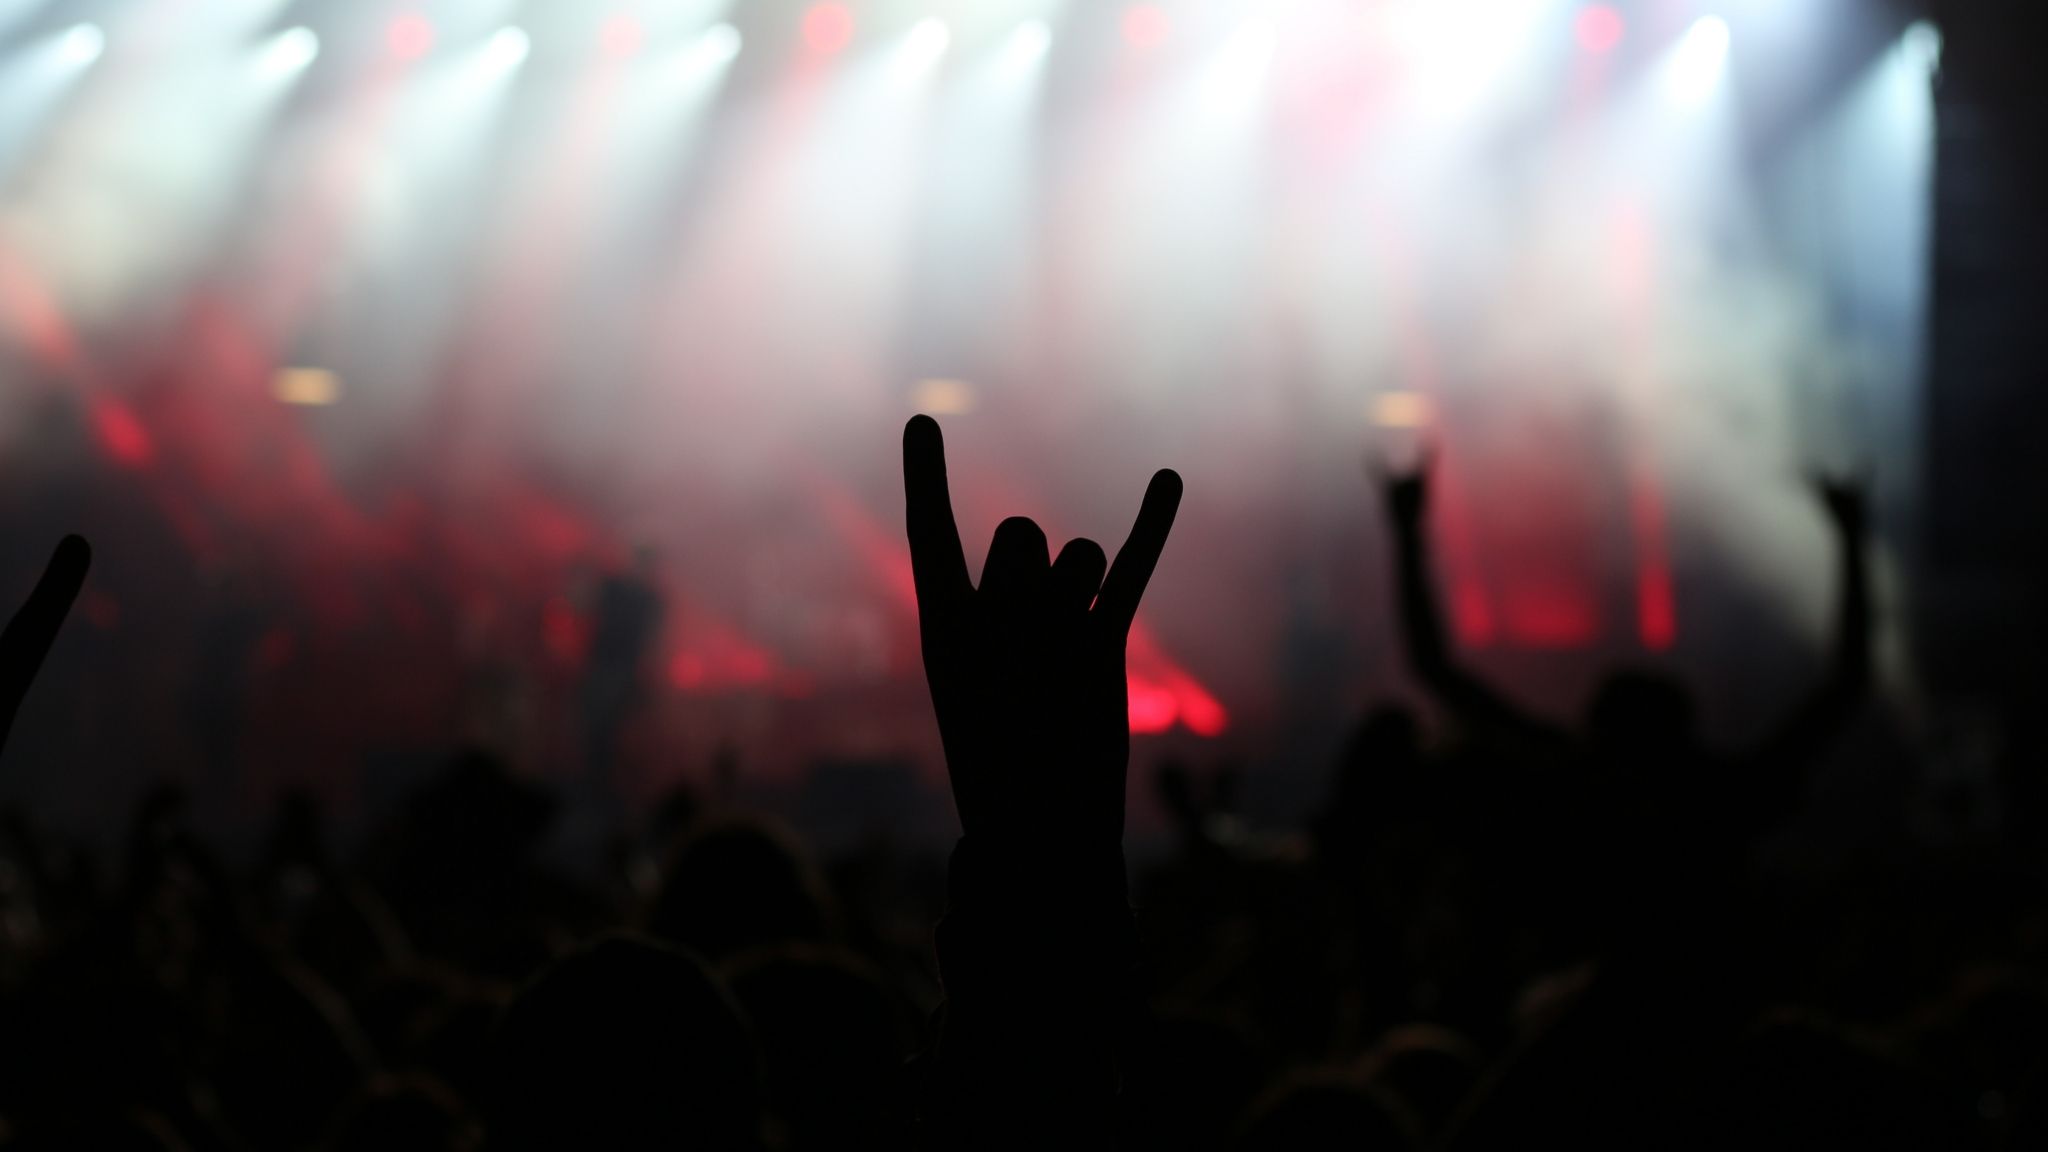 Download 2048x1152 wallpapers rock party, music concert, dance, hands, party, dual wide, widescreen, 2048x1152 hd image, background, 411